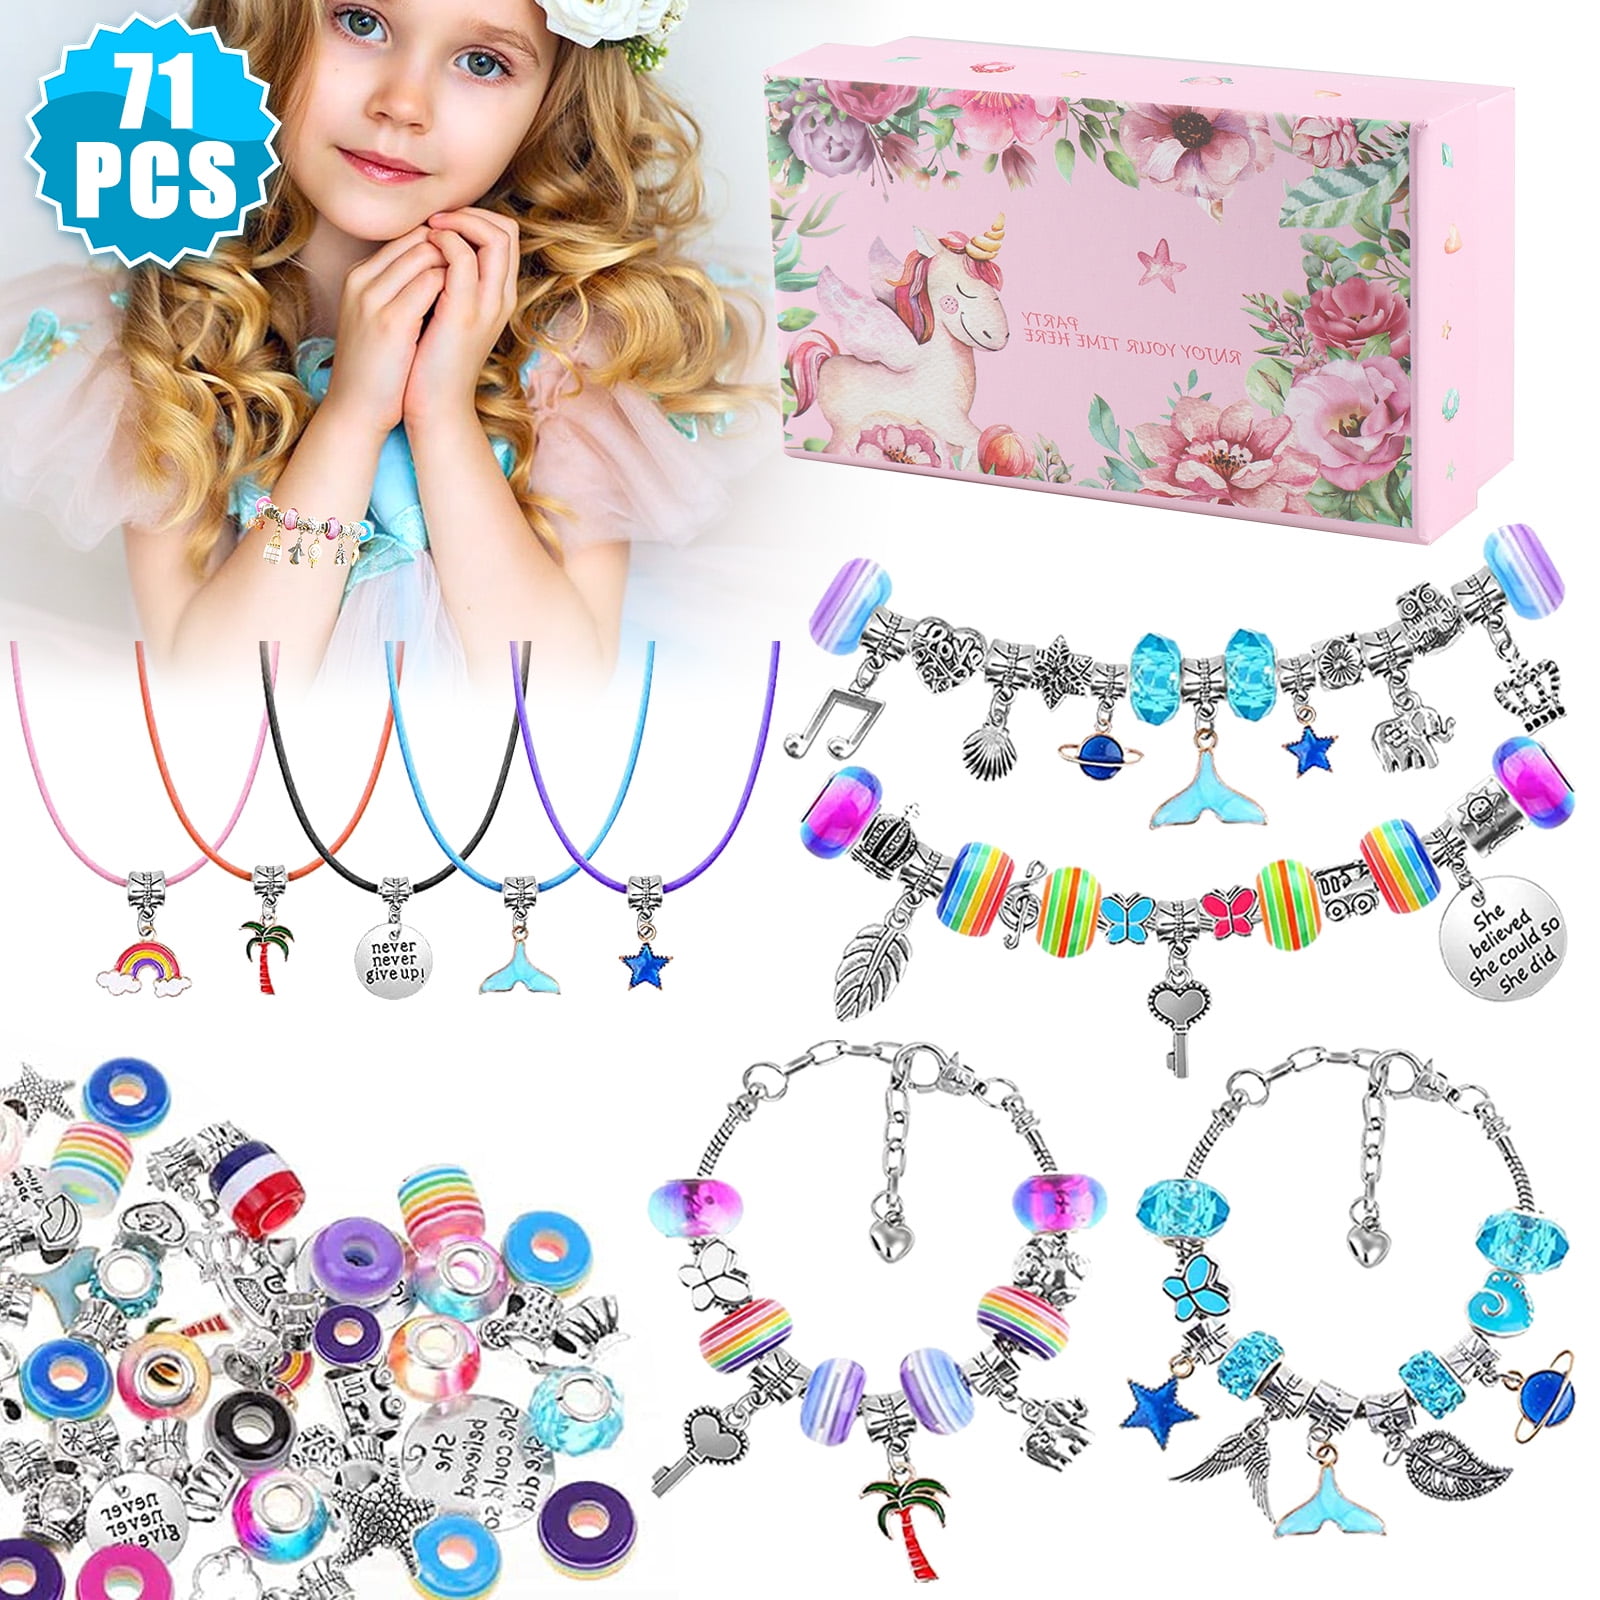 Pendant Charms with a Unicorn Gift Box and Storage Bag Anicco Charm Bracelet Making Kit with Beads Bracelets and Necklace for DIY Craft Gifts for Teen Girls Age 8-12